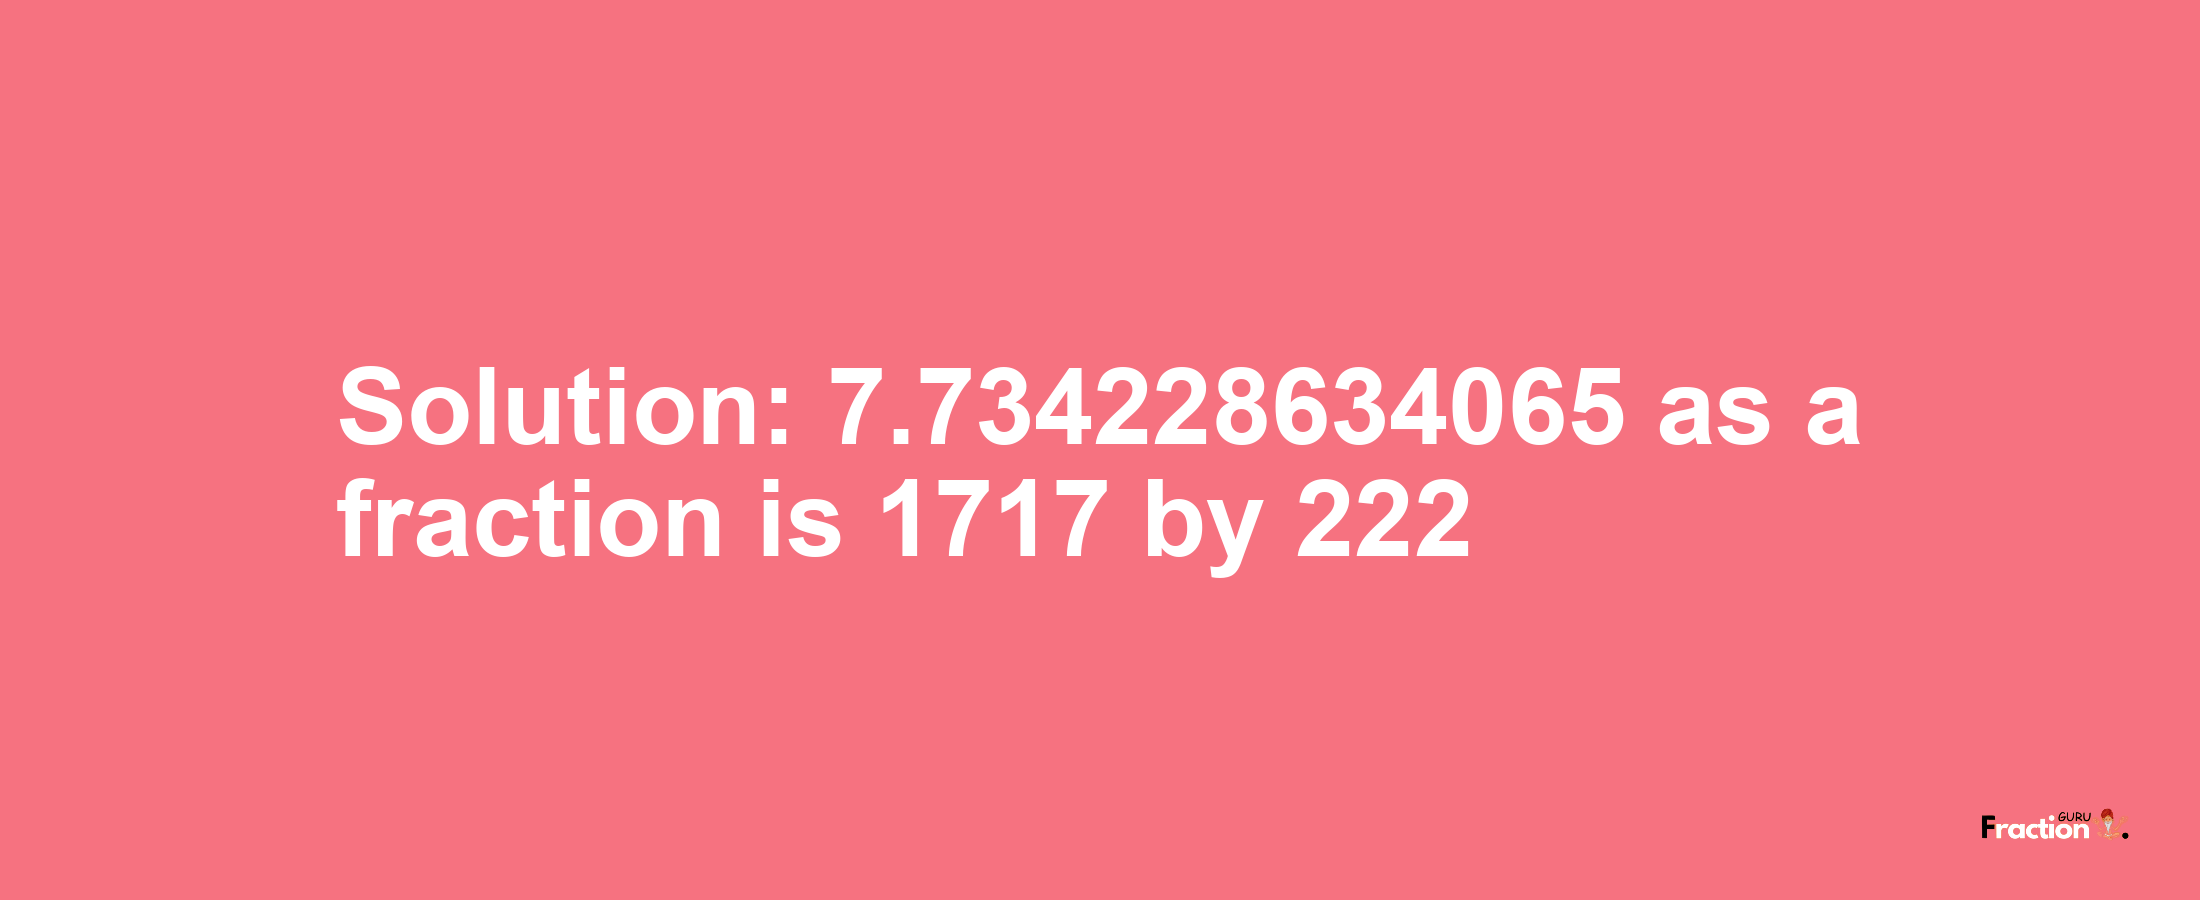 Solution:7.734228634065 as a fraction is 1717/222